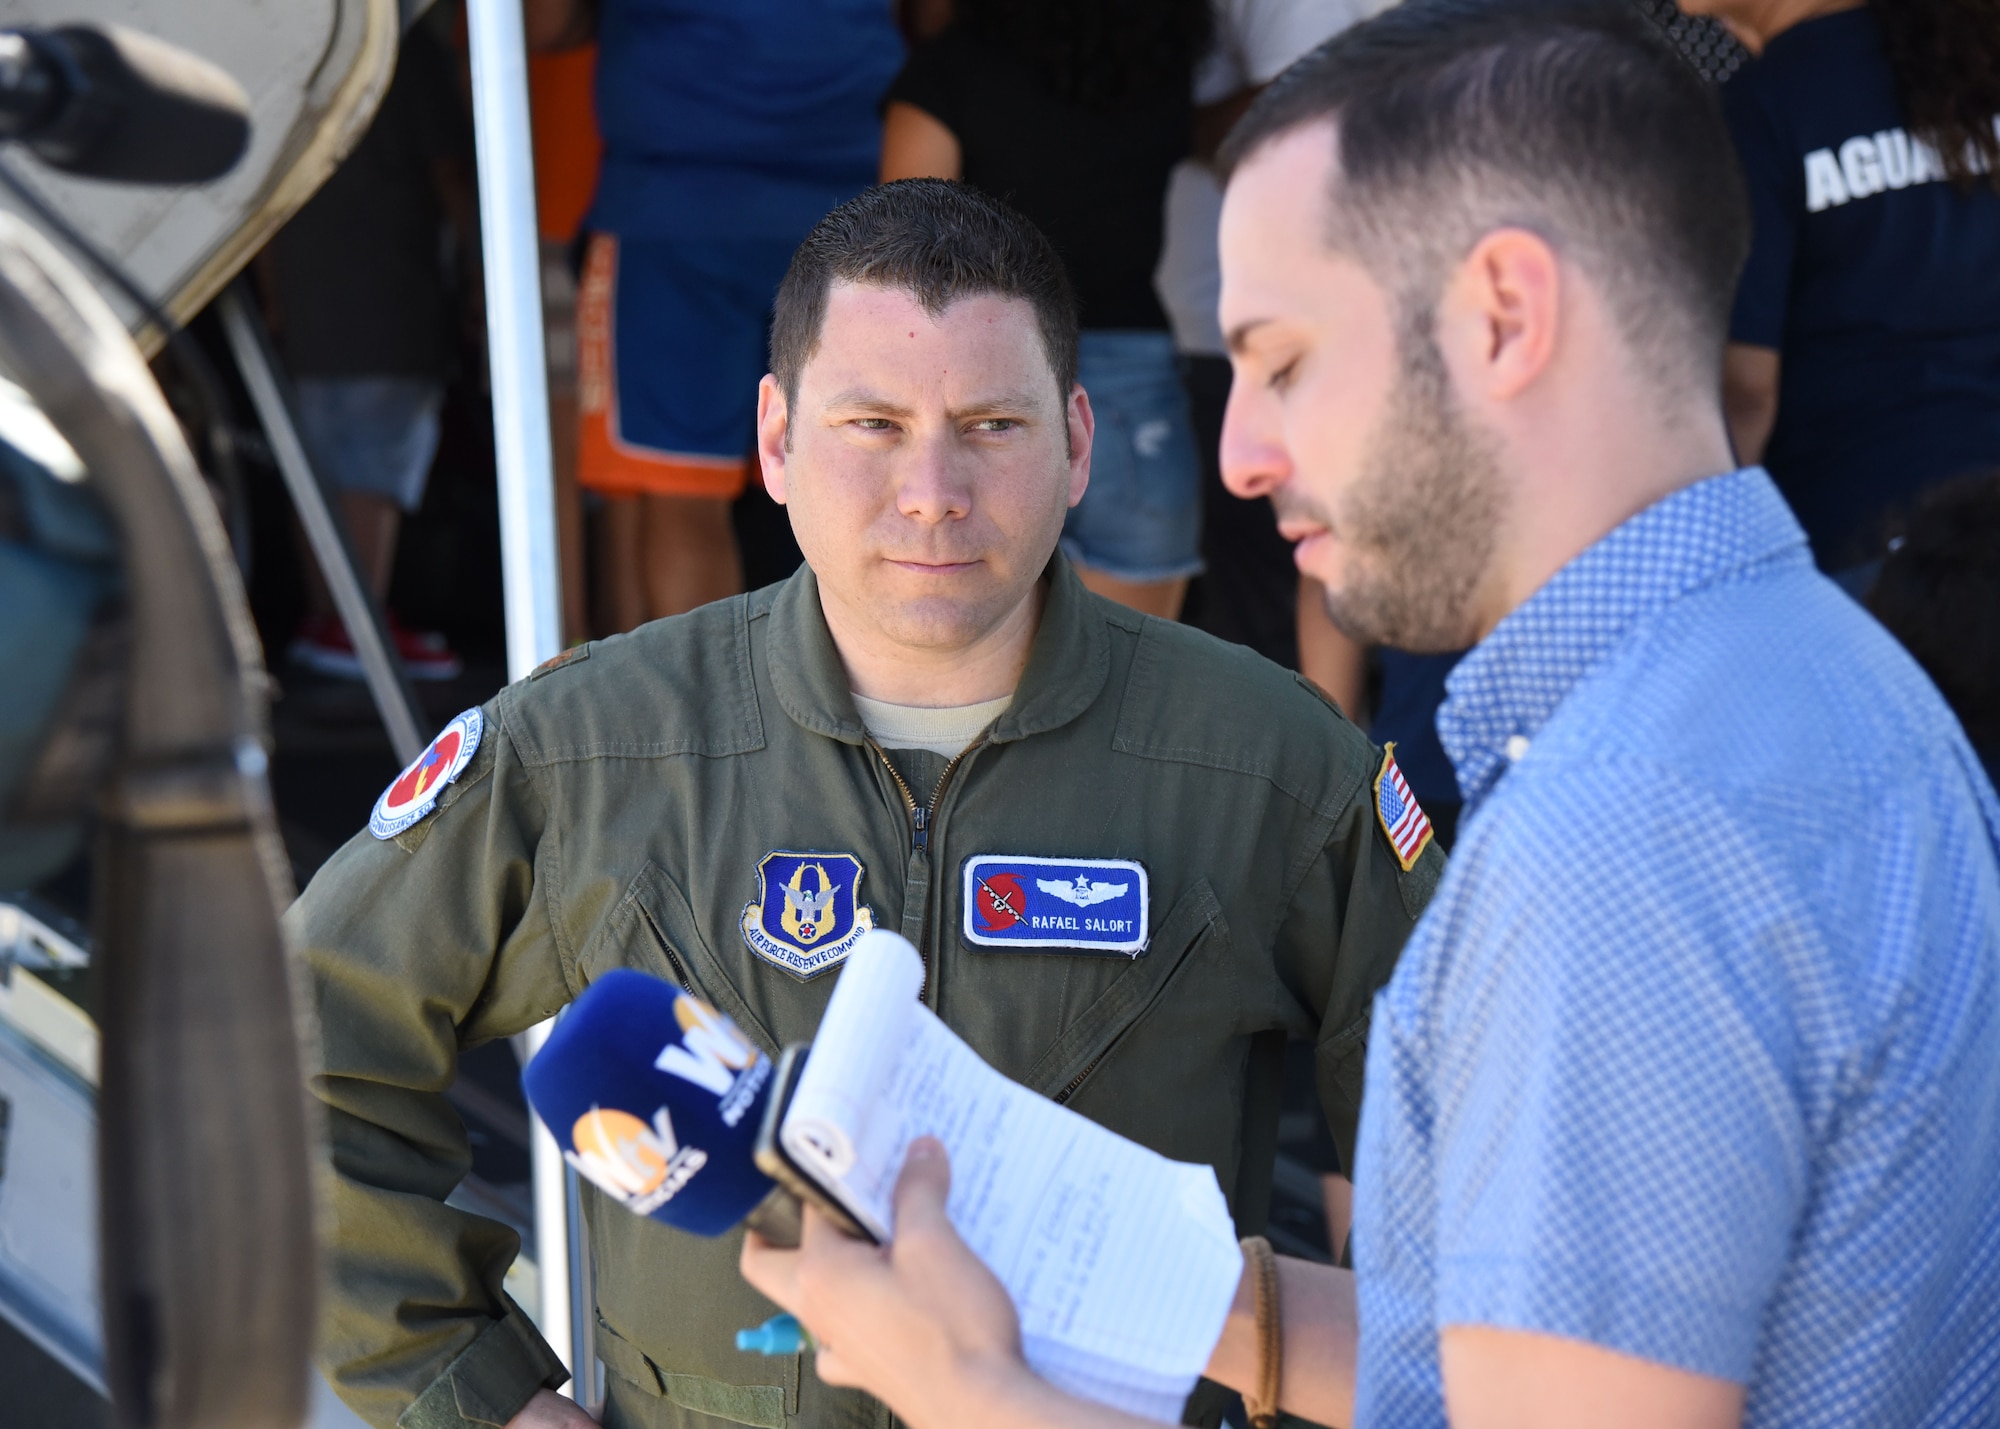 Maj. Rafael Salort, 53rd Weather Reconnaissance Squadron navigator and mission commander, conducts an interview with media at the Rafael Hernández Airport, Aguadilla, Puerto Rico, April 13, 2019. NOAA hurricane specialists and the U.S. Air Force Reserve Hurricane Hunters discussed hurricane preparedness, resilience and how they can become “weather-ready” during the 2019 Caribbean Hurricane Awareness Tour April 8-13, 2019. As part of the event dignitaries, students and the public toured the Air Force Reserve Command’s WC-130J “Hurricane Hunter” aircraft to learn how scientists collect hurricane information. (U.S. Air Force photo/Lt. Col. Marnee A.C. Losurdo)